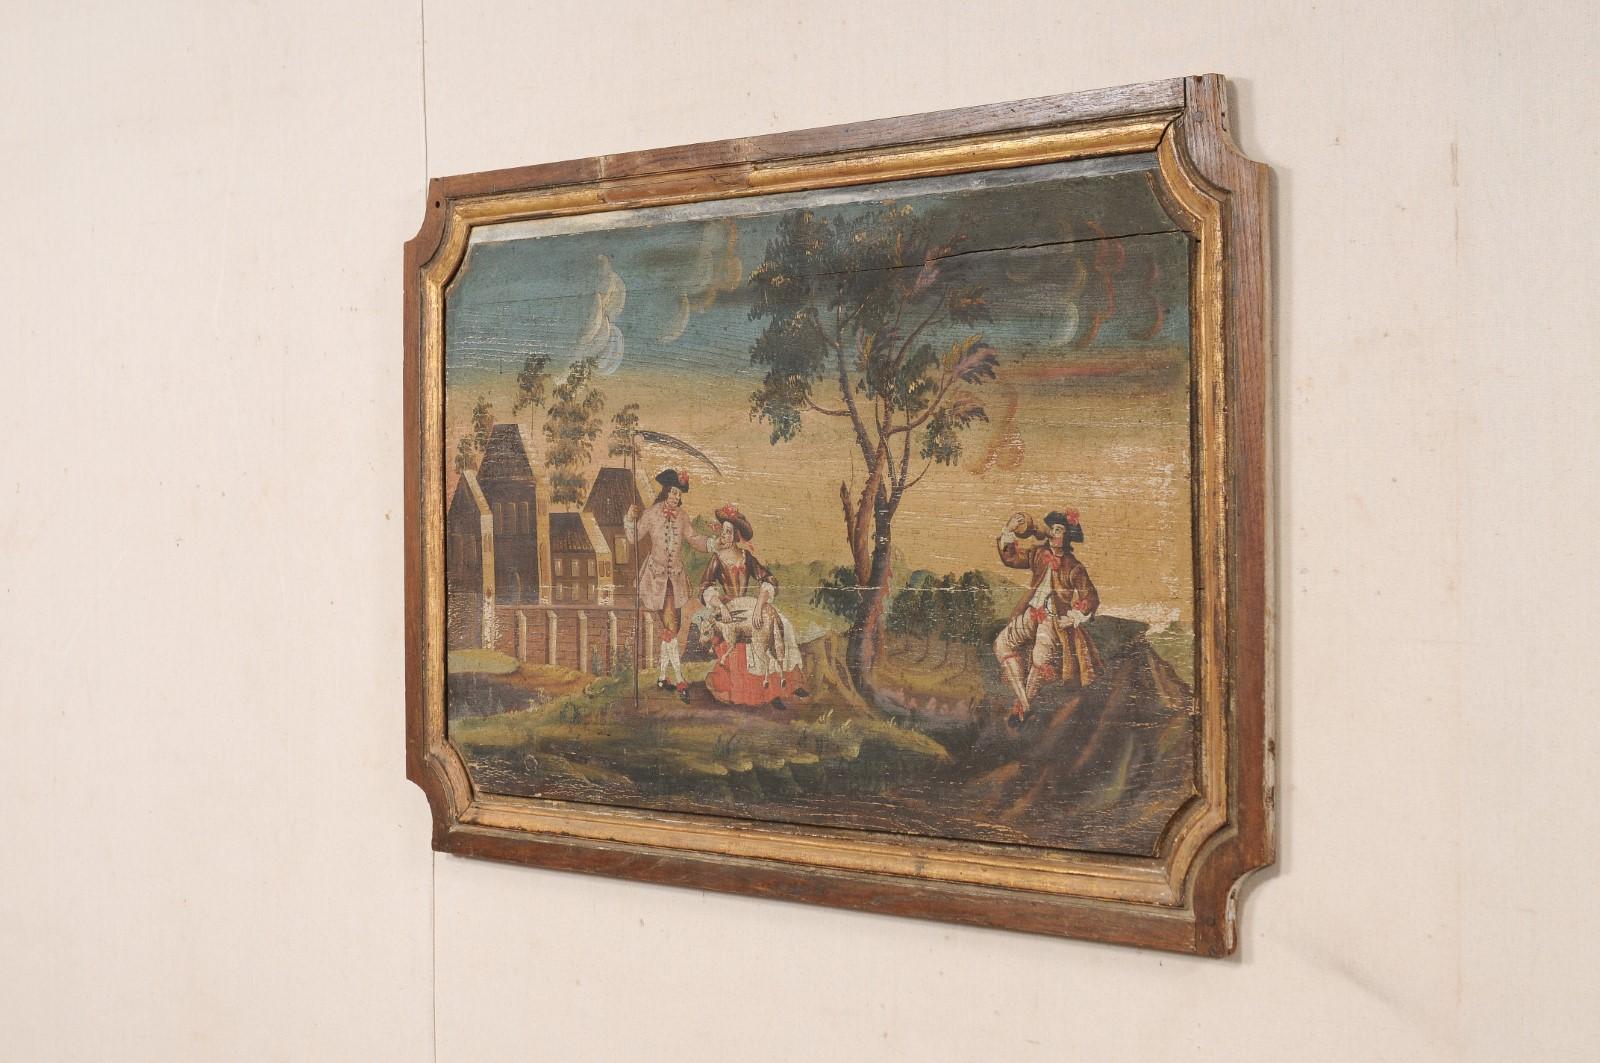 19th C. French Landscape & Figures Painting on Wooden Plaque (4+ Ft Wide) For Sale 2